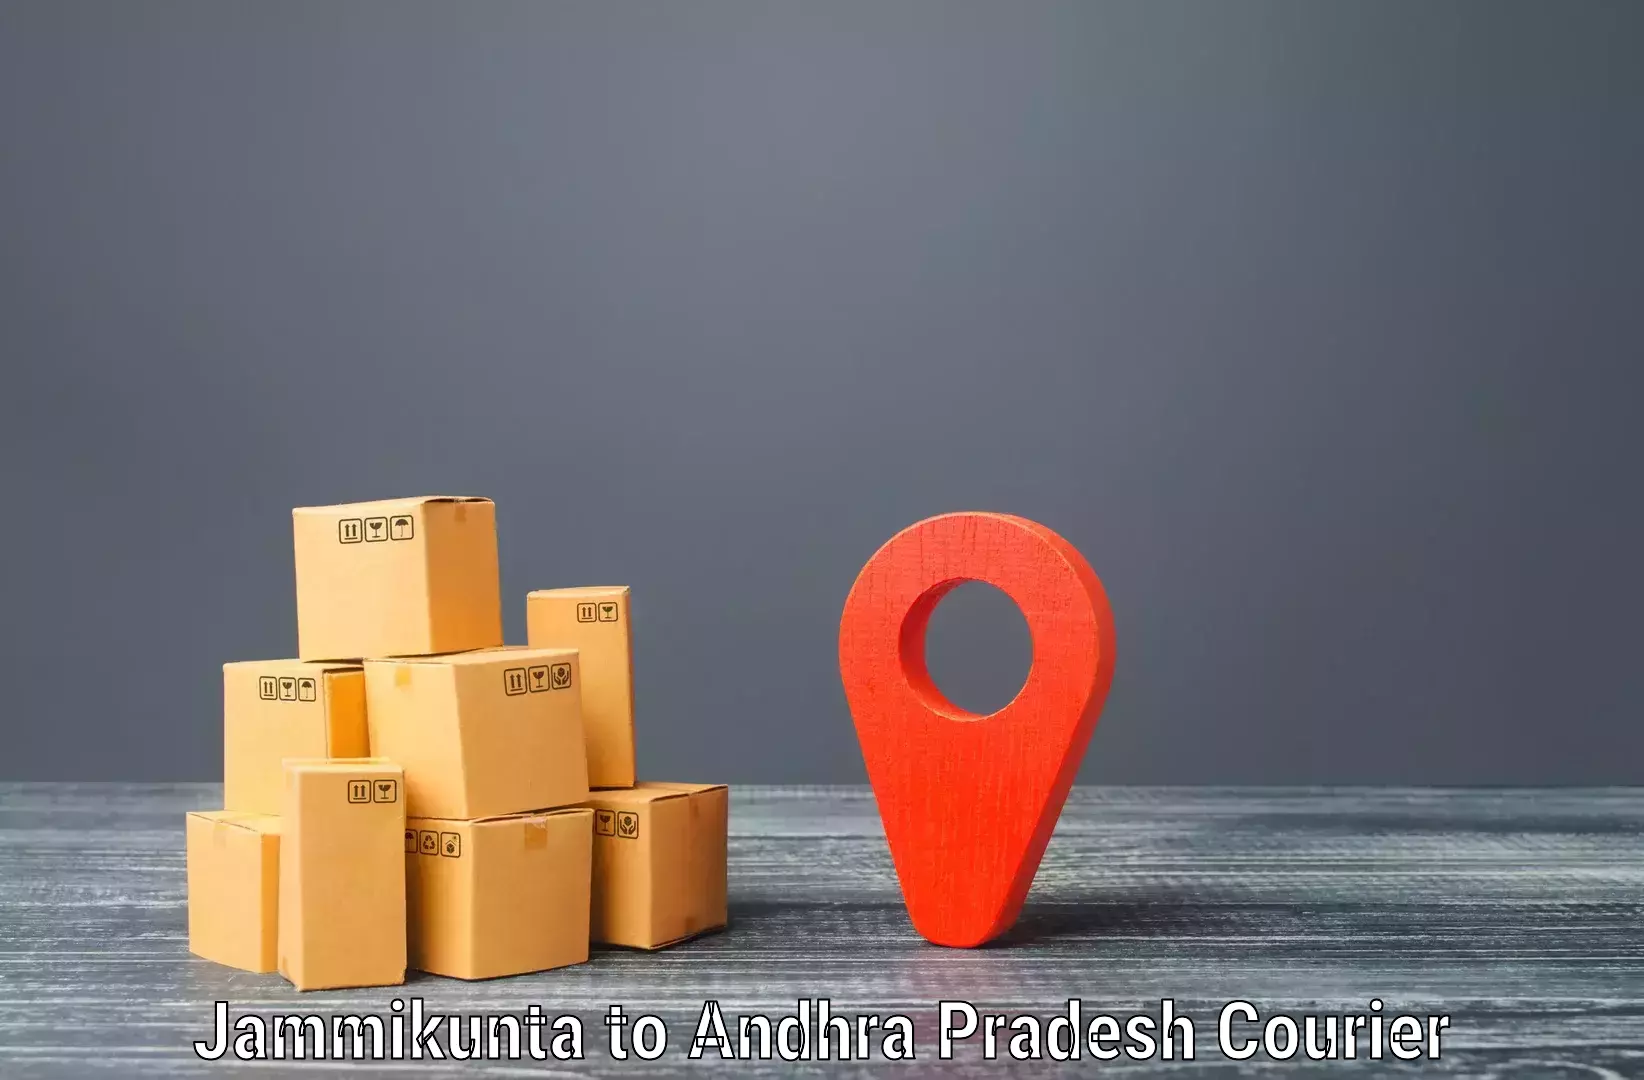 Package delivery network Jammikunta to Dachepalle